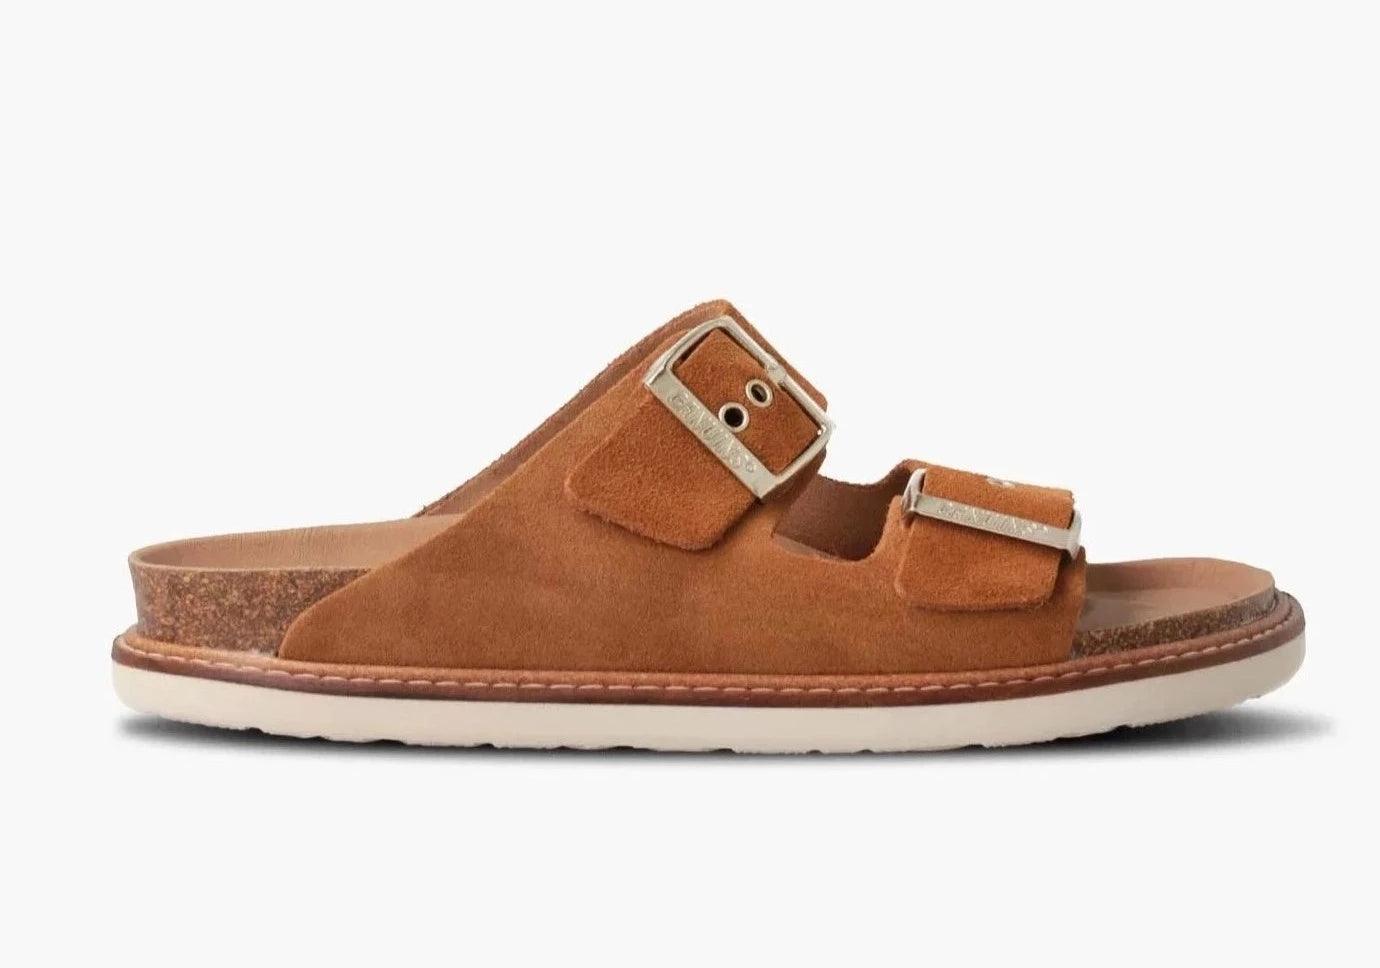 Genuins Hawaii Velour Soft Tan Sandal Mule Style - MADE THE EDIT